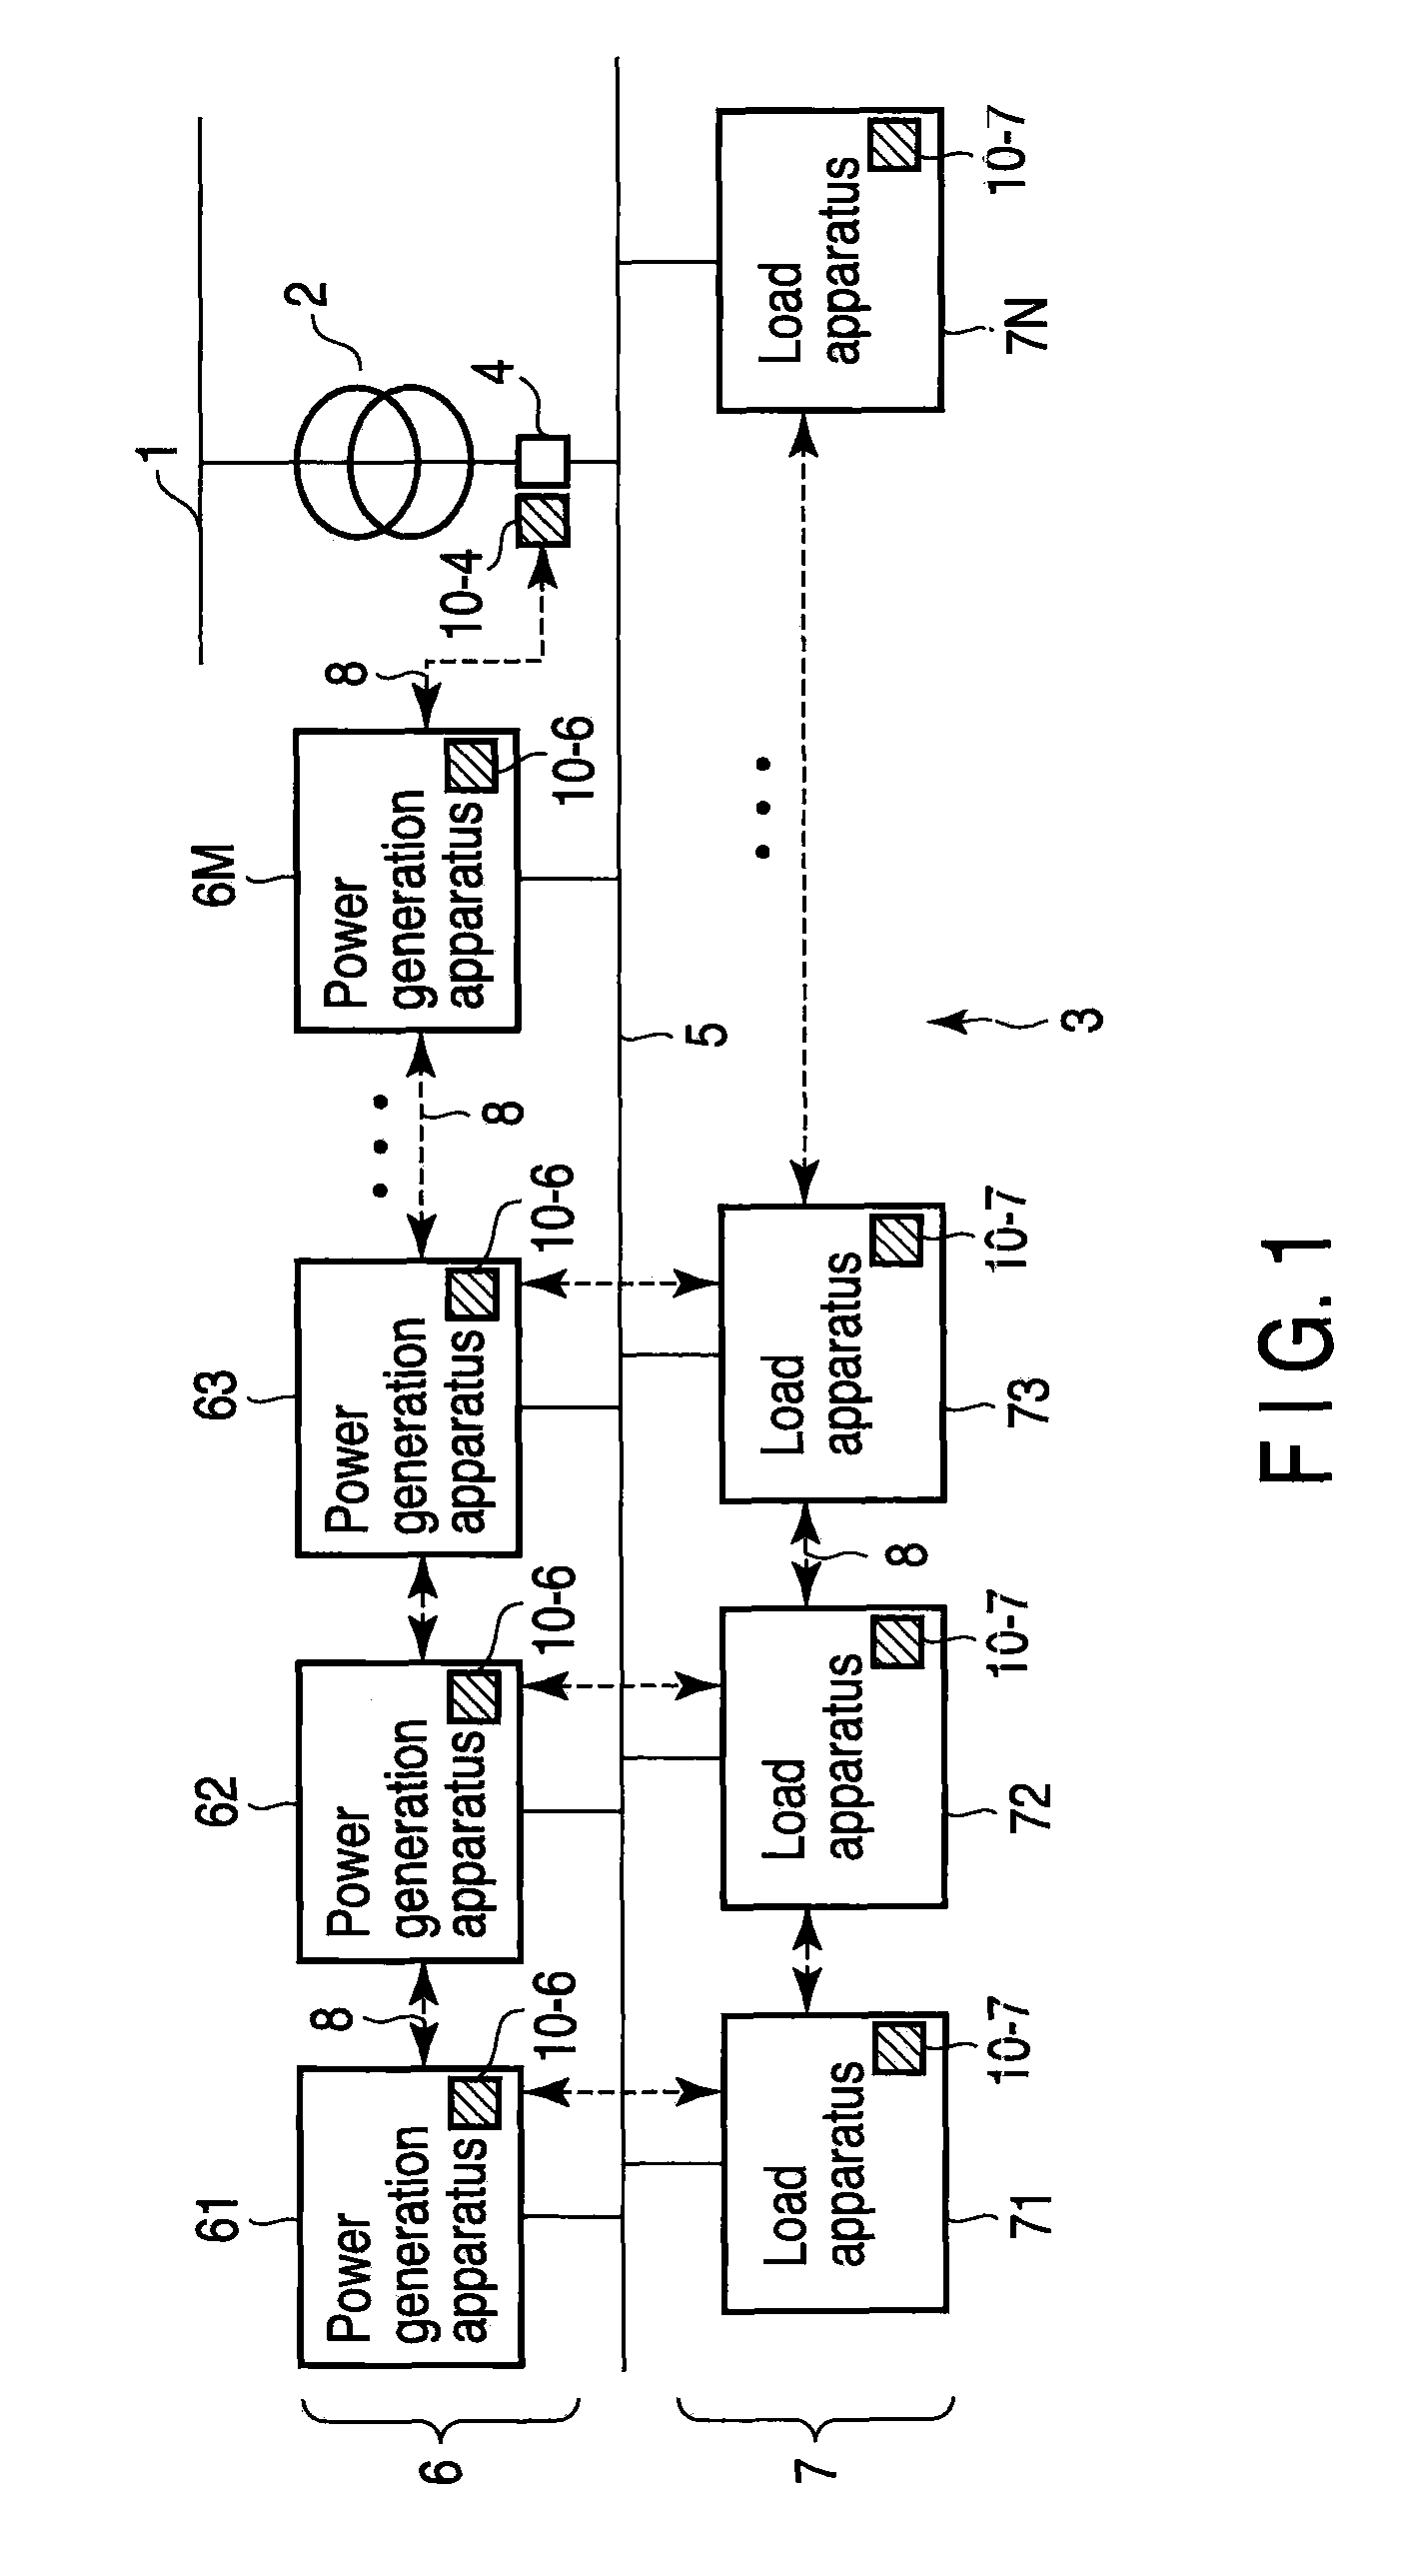 Supply-and-demand control system of distributed and coordinated type, for use in power systems